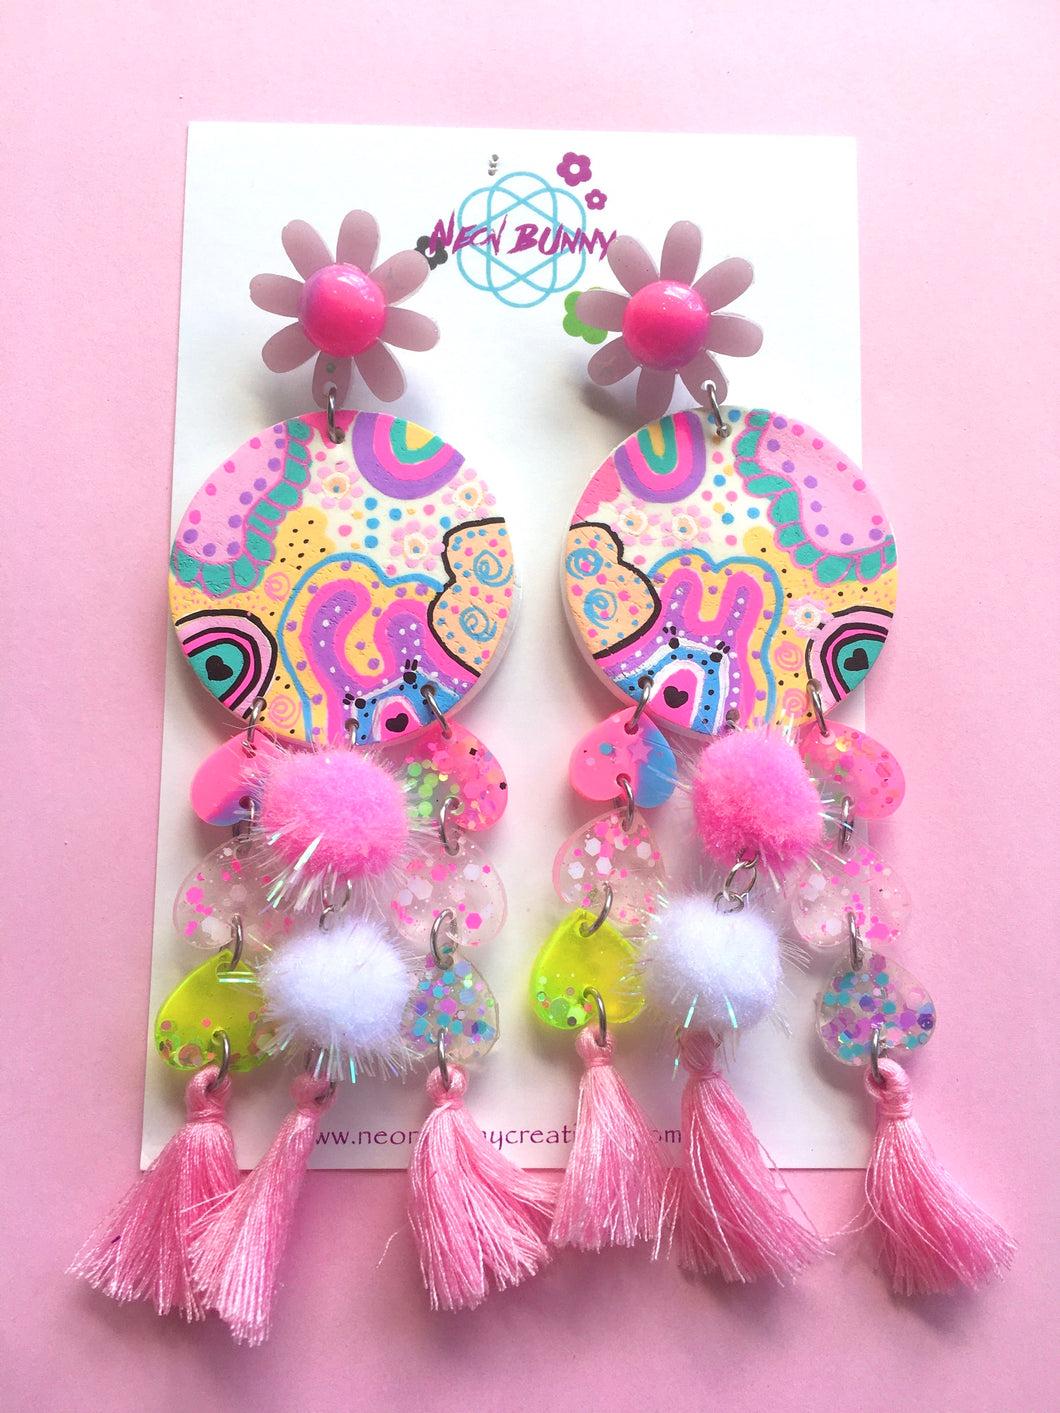 Bunny land Large Statement Earrings